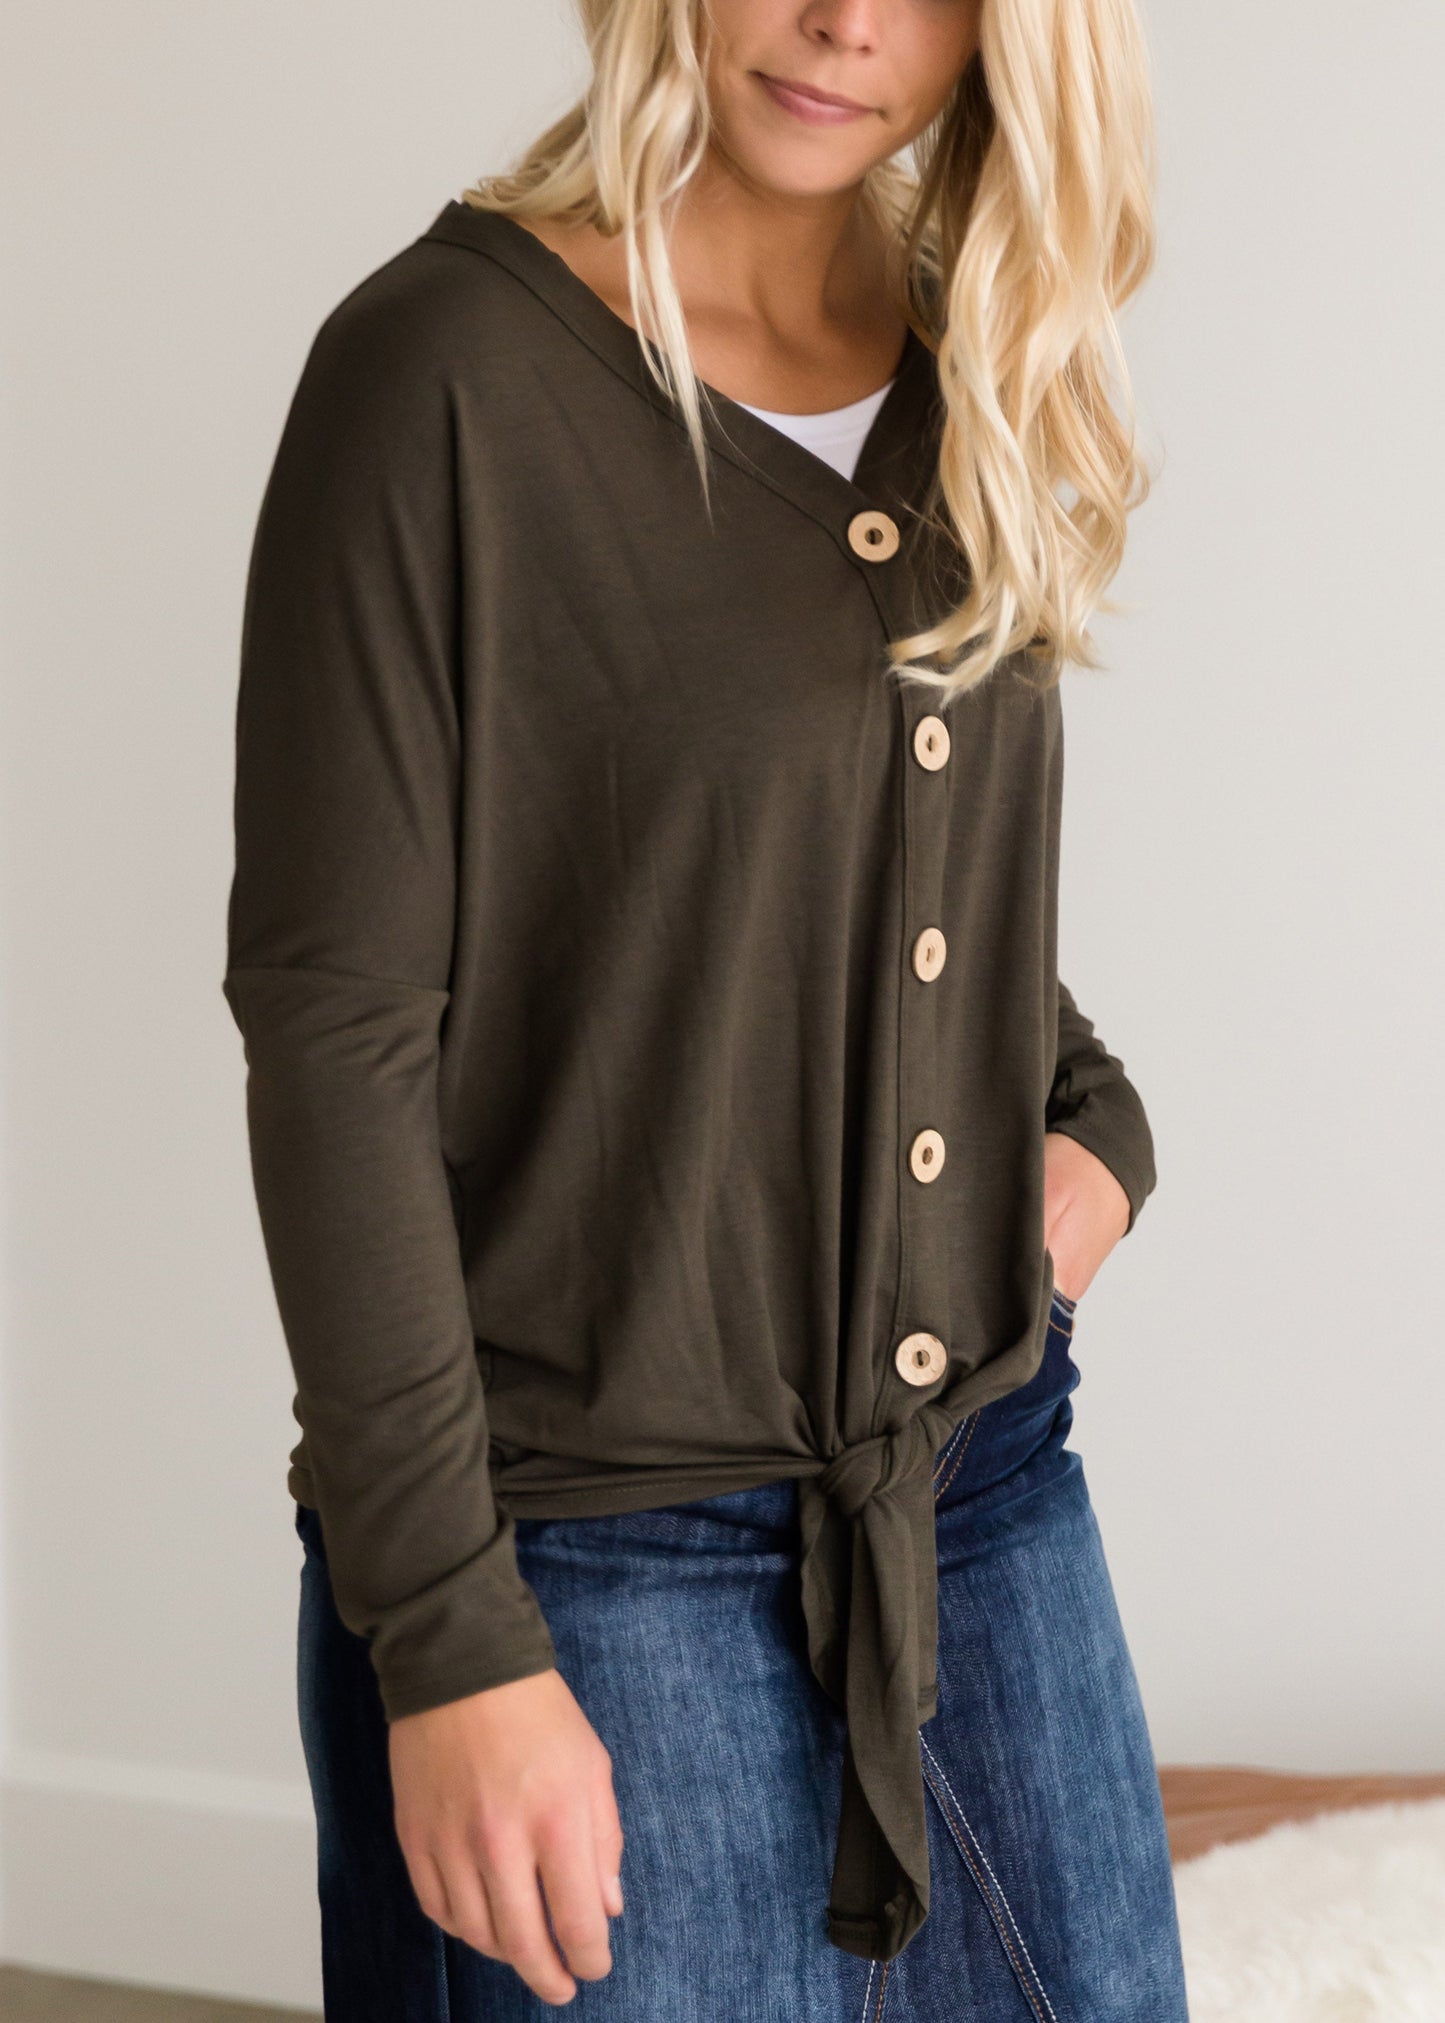 Button Up Tie Front Top - FINAL SALE Tops